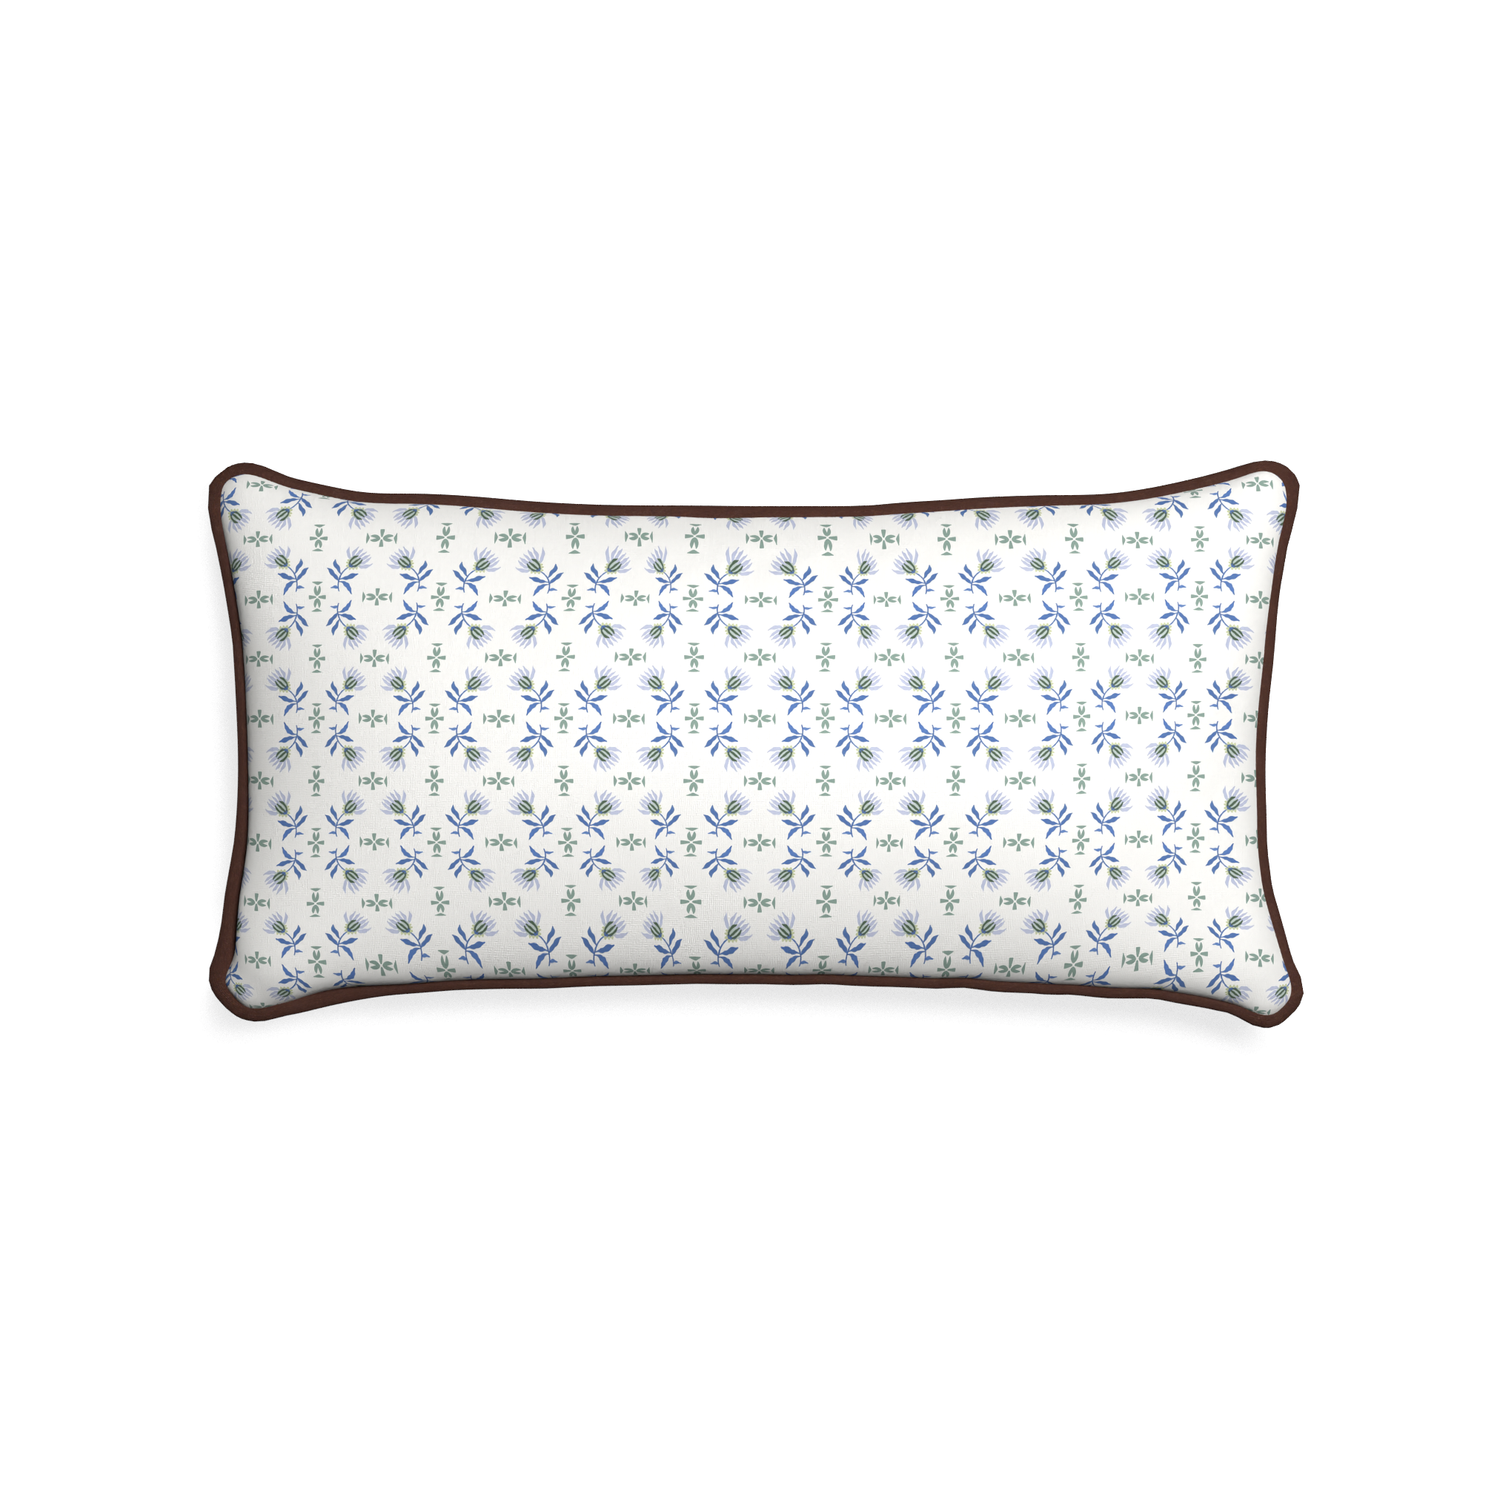 Midi-lumbar lee custom blue & green floralpillow with w piping on white background